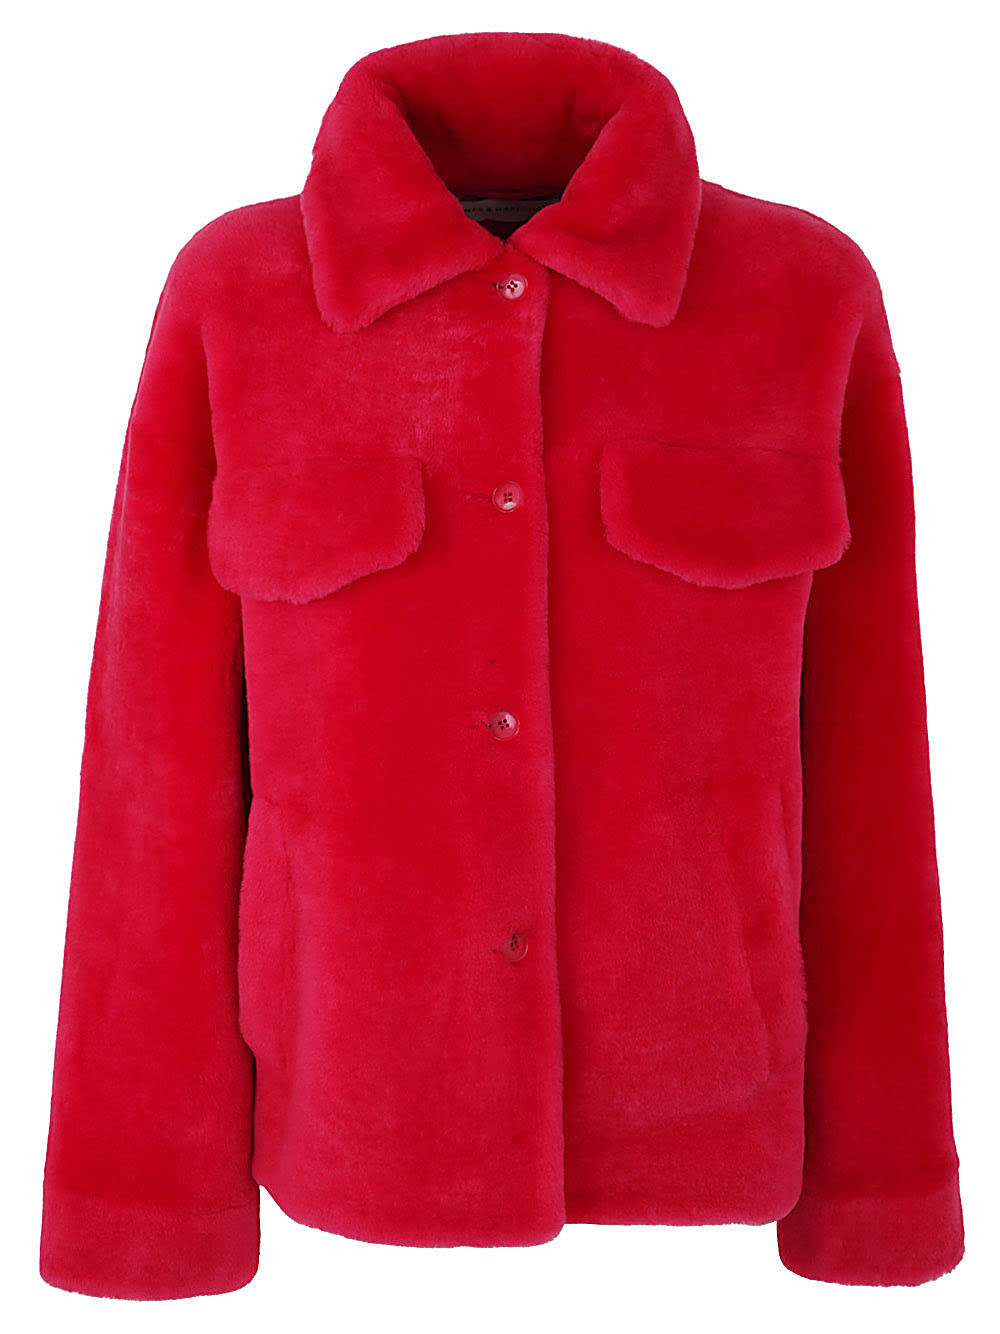 Ines & Marechal Shearling Jacketwith Pockets